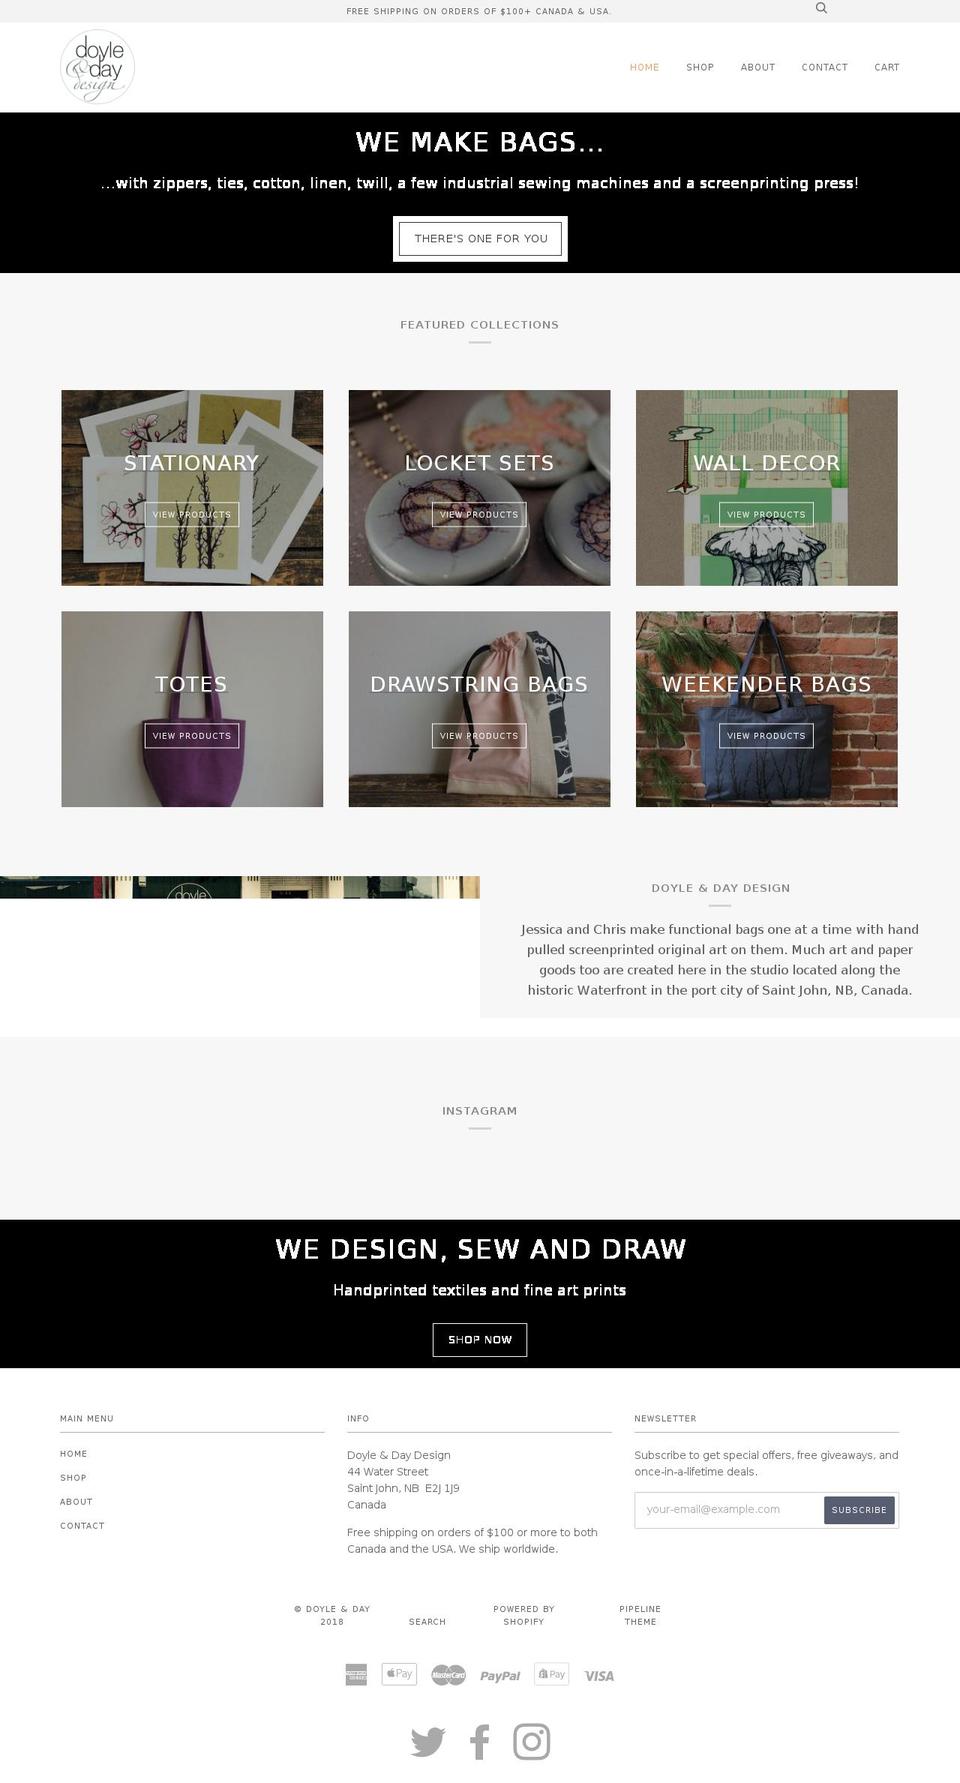 Copy of Pipeline Shopify theme site example doyleandday.com